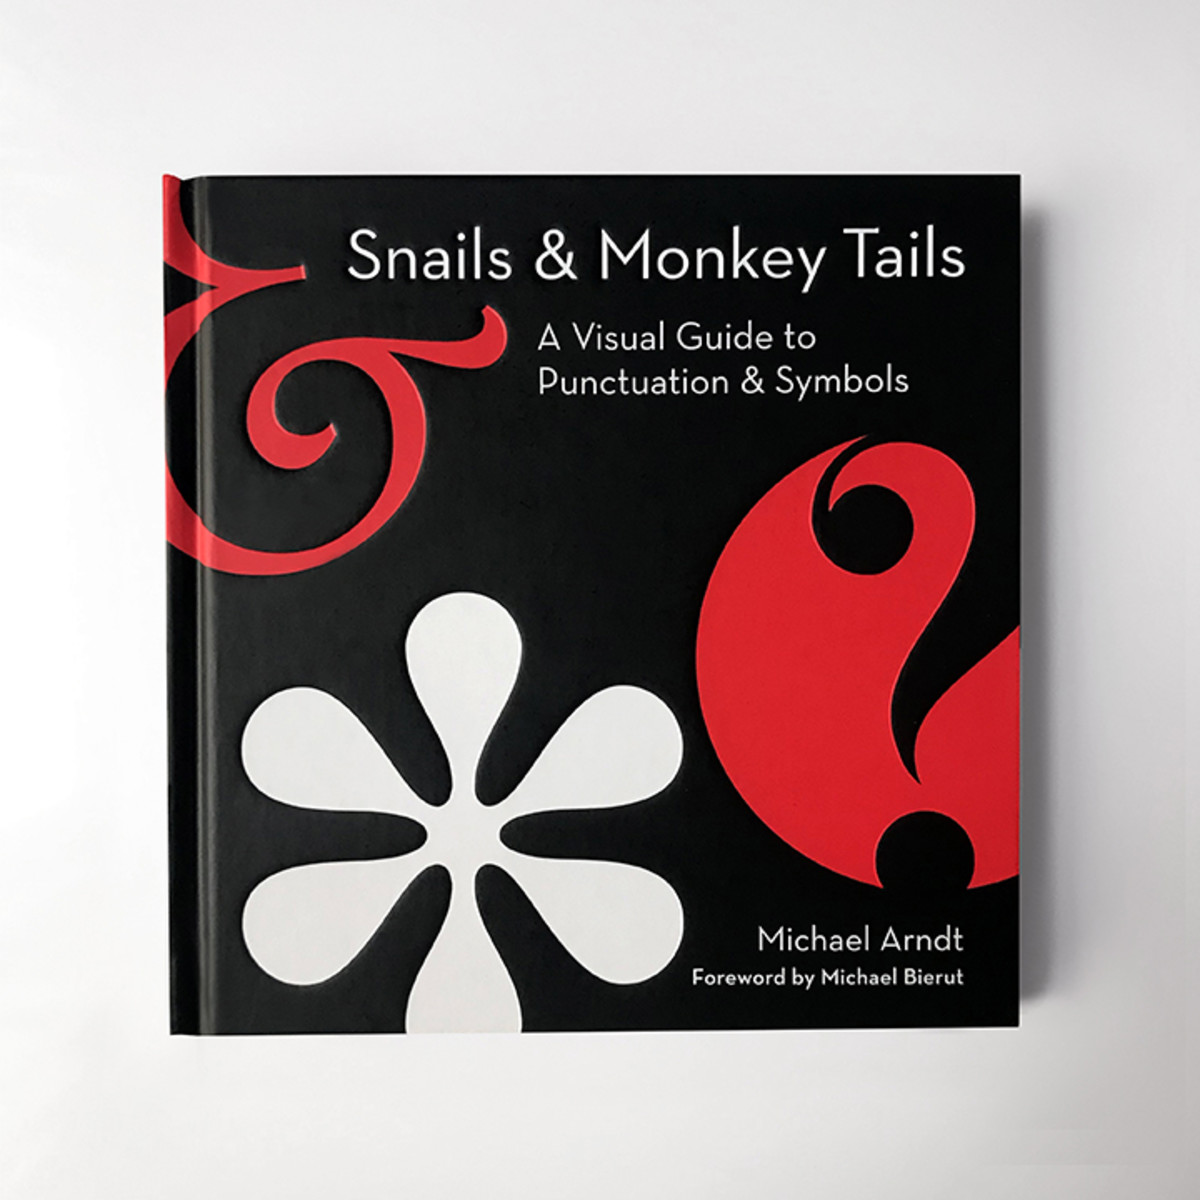 Snails & Monkey Tails: A Visual Guide to Punctuation & Symbols, by Michael Arndt